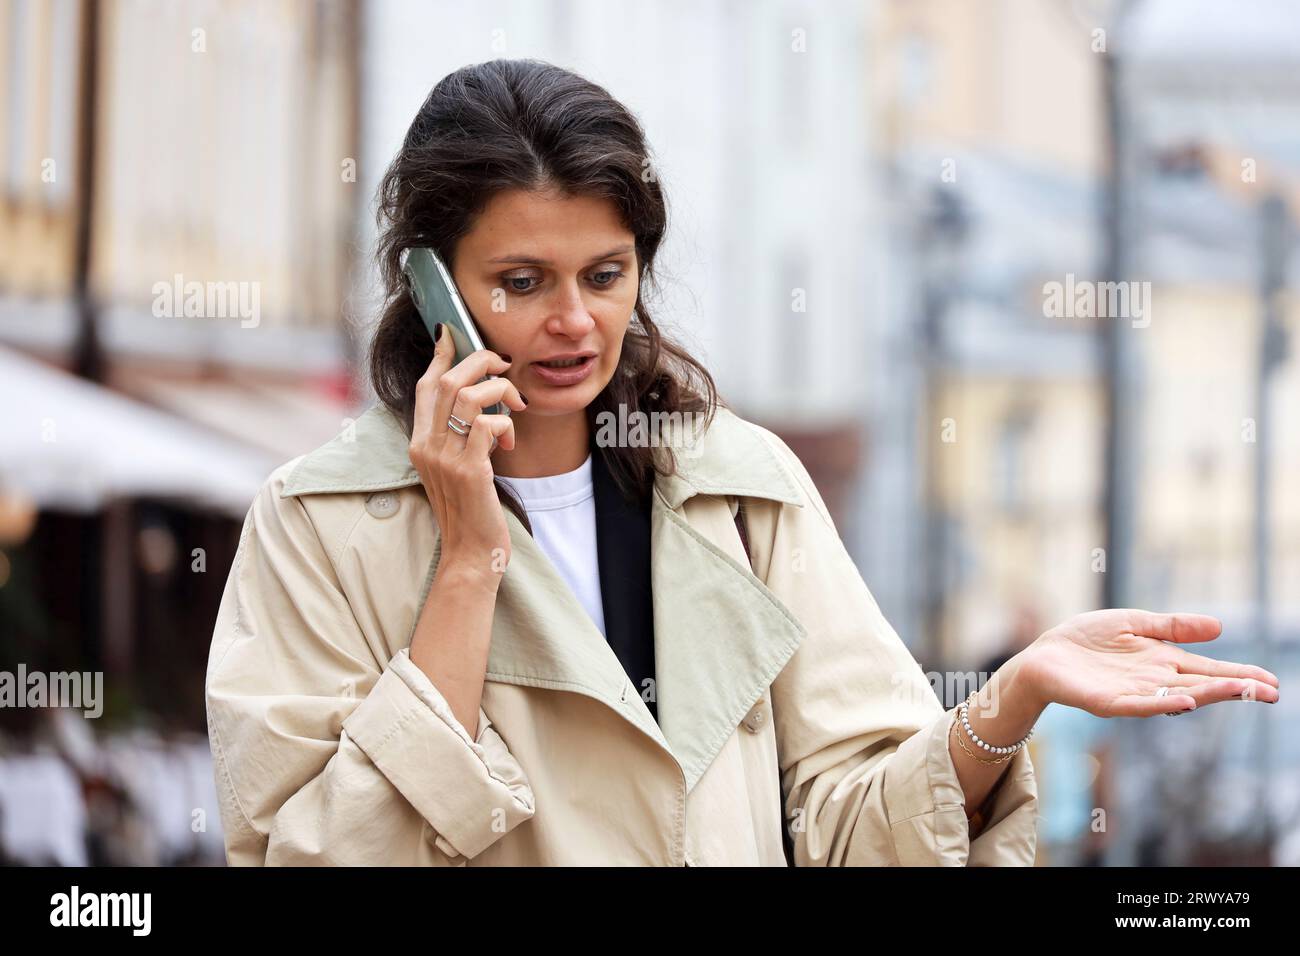 Woman talking emotionally on mobile phone on city street Stock Photo